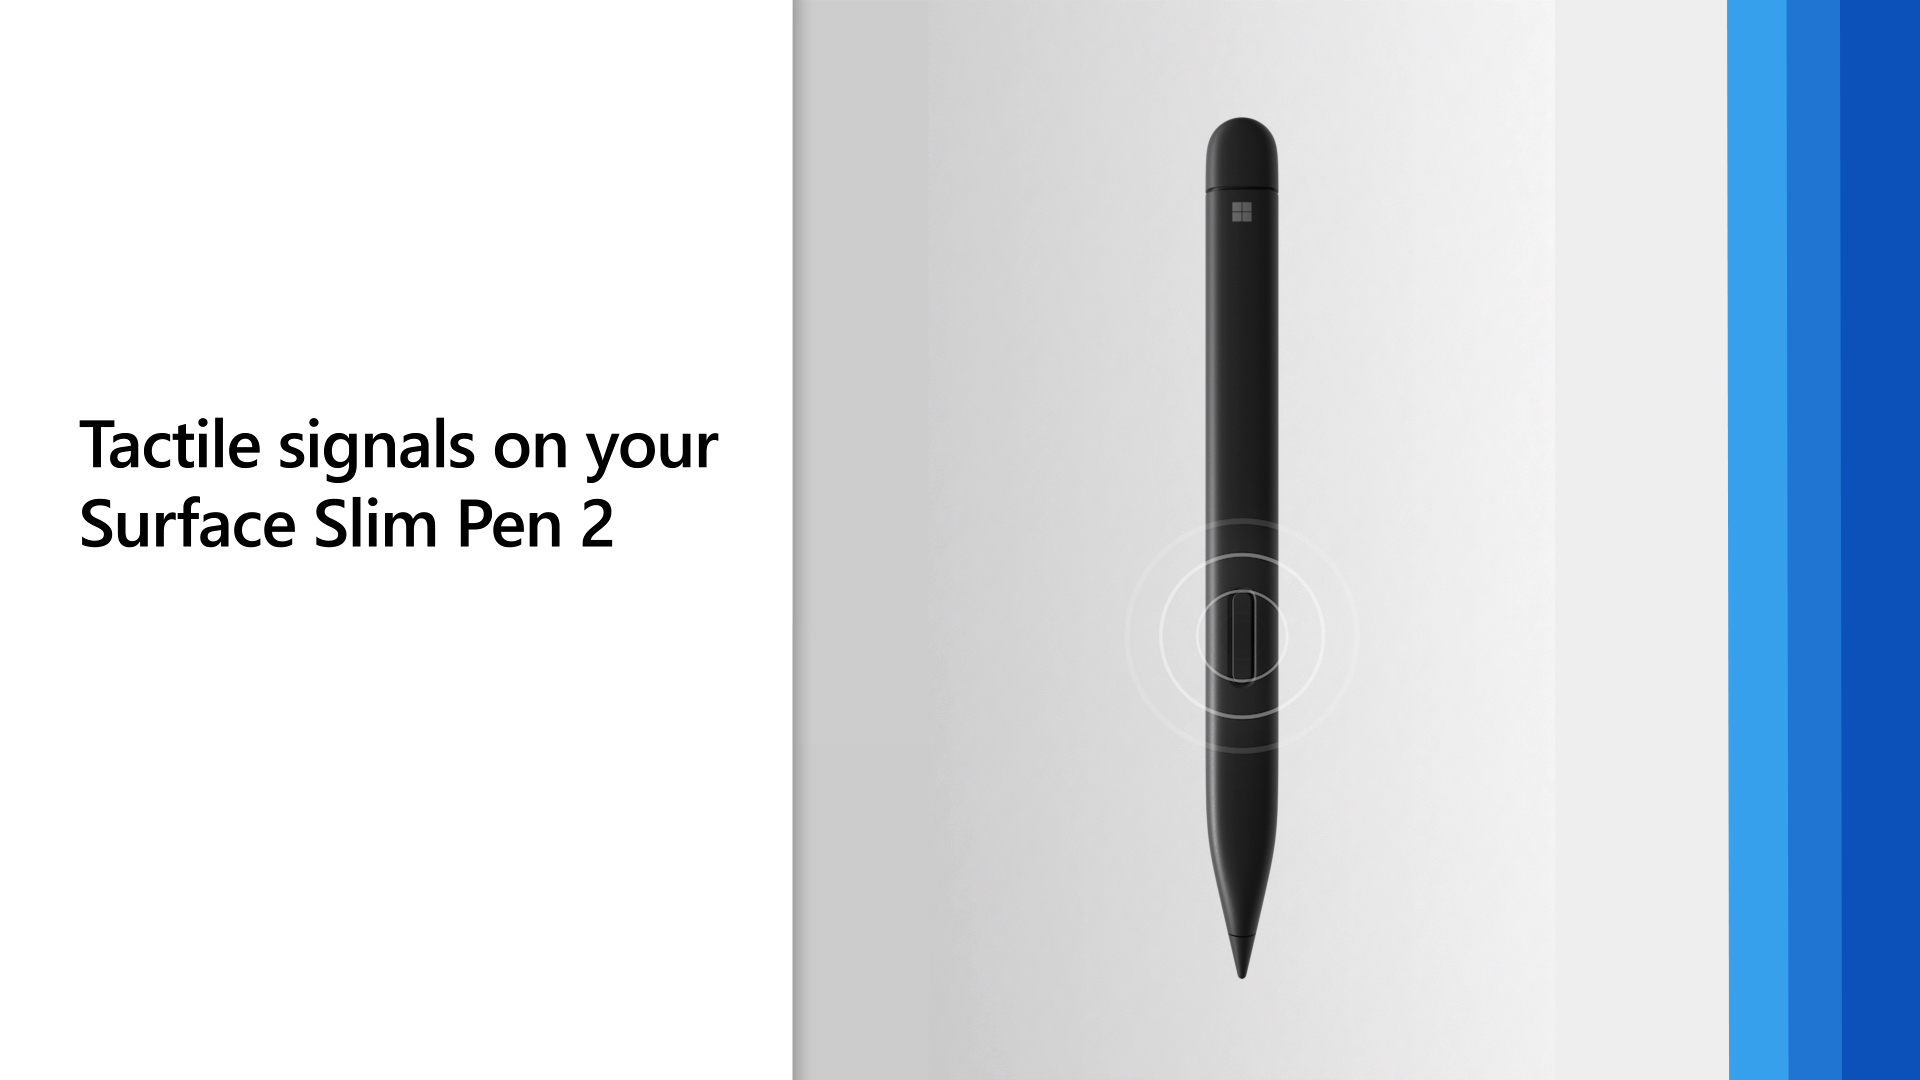 Use Surface Slim Pen 2 - Microsoft Support